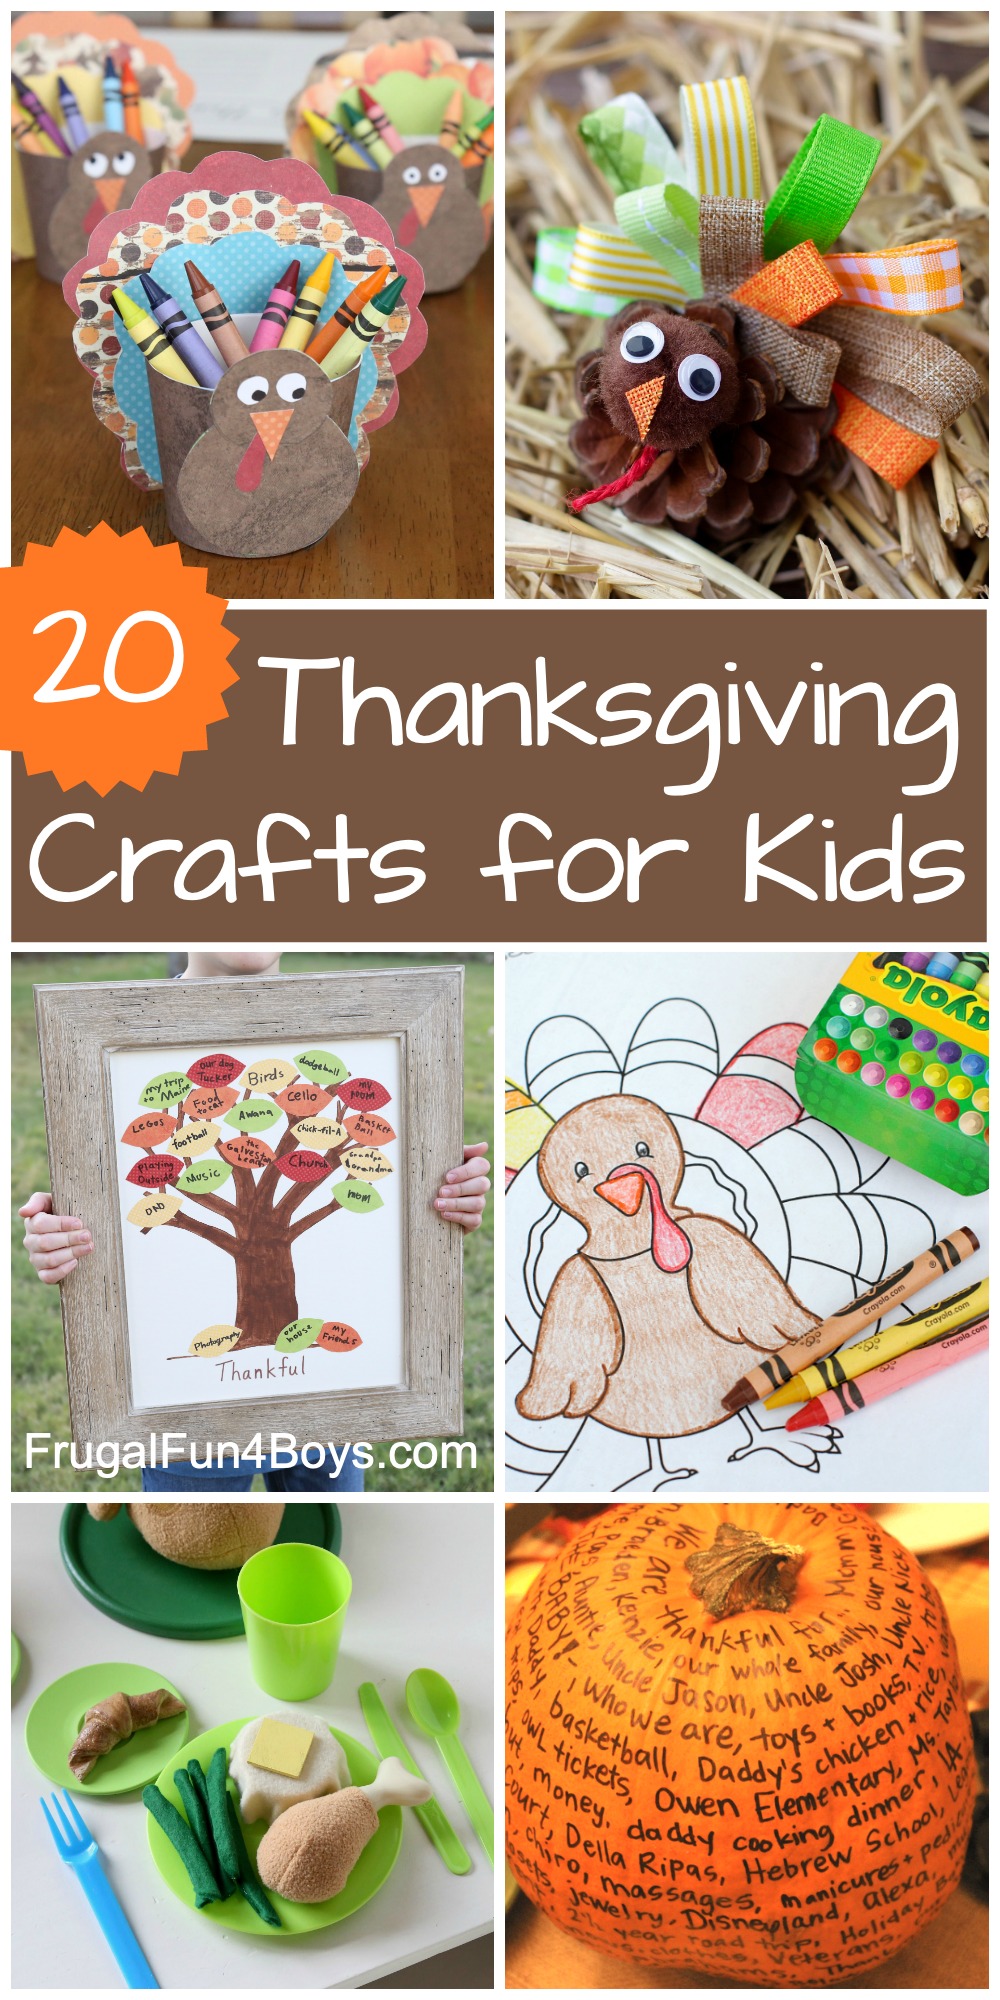 20 of the Best Thanksgiving Crafts for Kids